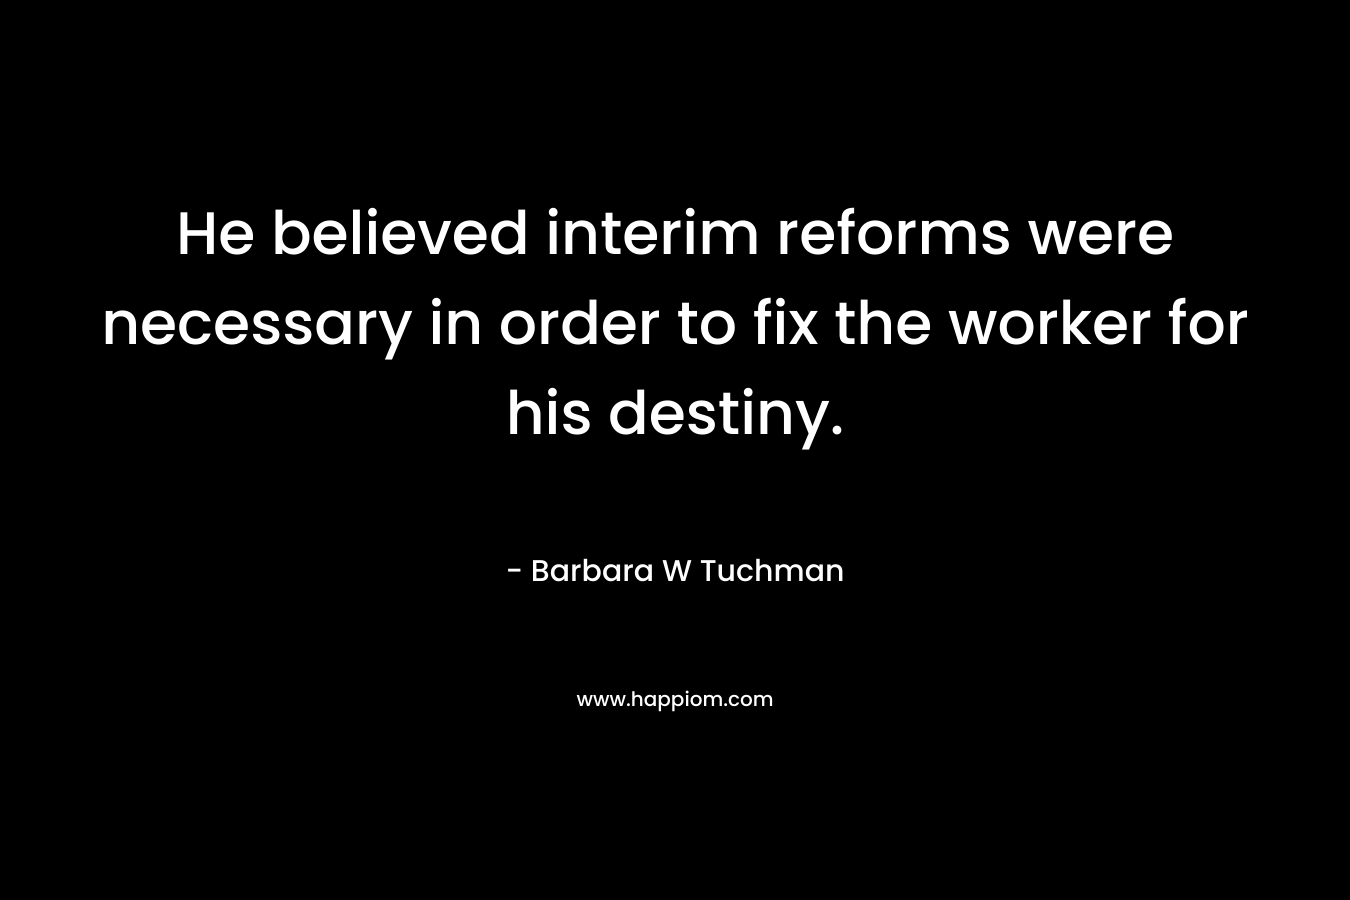 He believed interim reforms were necessary in order to fix the worker for his destiny. – Barbara W Tuchman